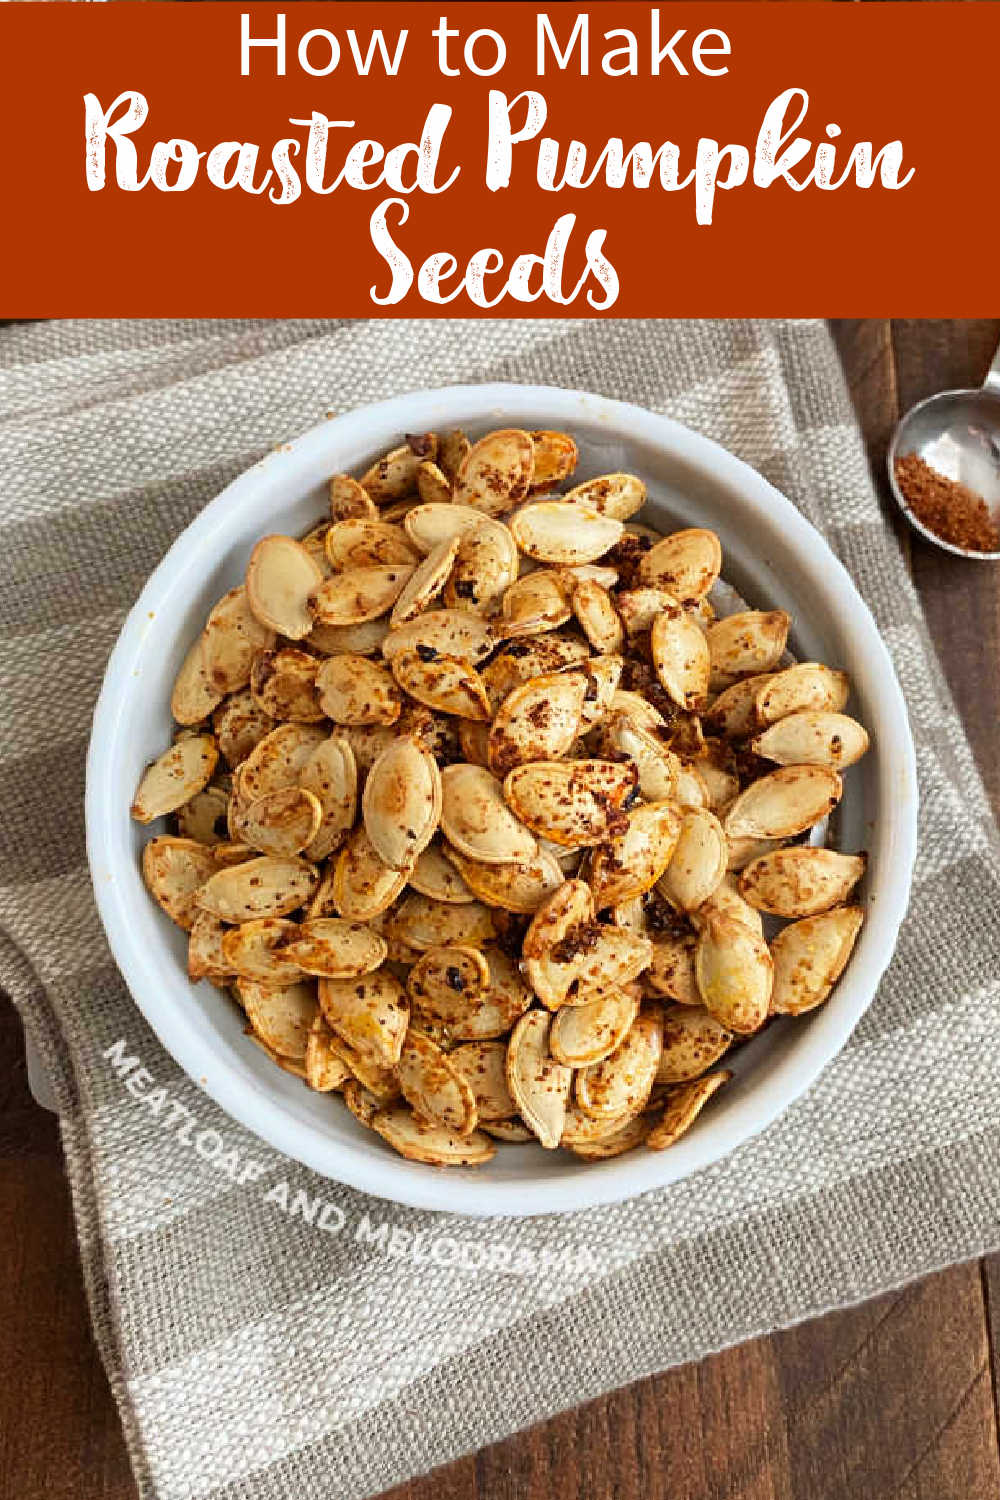 Learn how to clean and roast pumpkin seeds with this spicy roasted pumpkin seeds recipe. This easy pumpkin seed recipe makes a delicious, crunchy snack that is perfect for fall! via @meamel